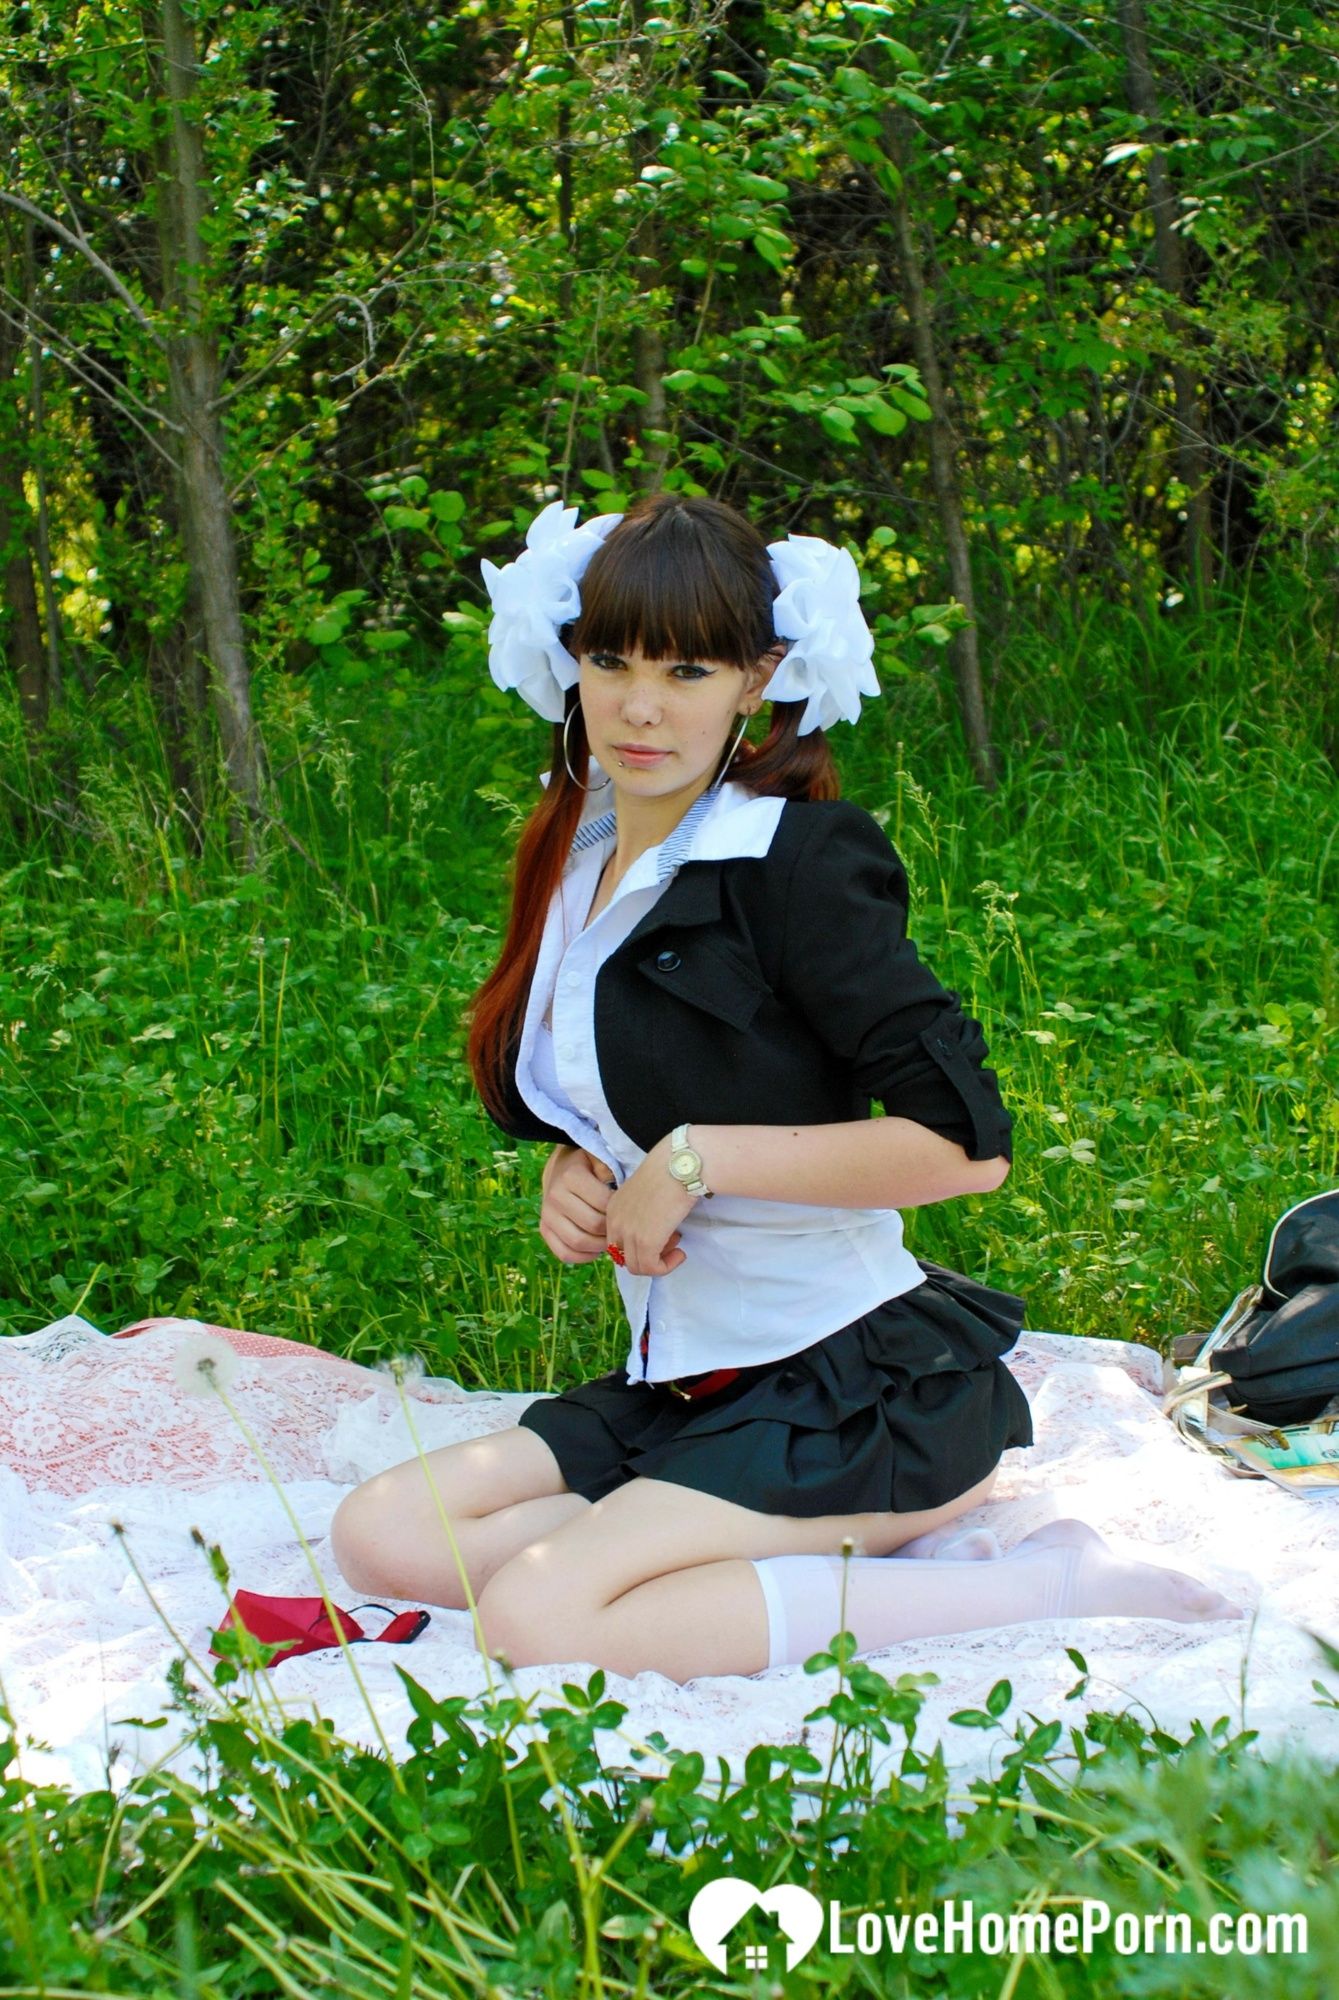 Schoolgirl turns a picnic into a teasing session #8